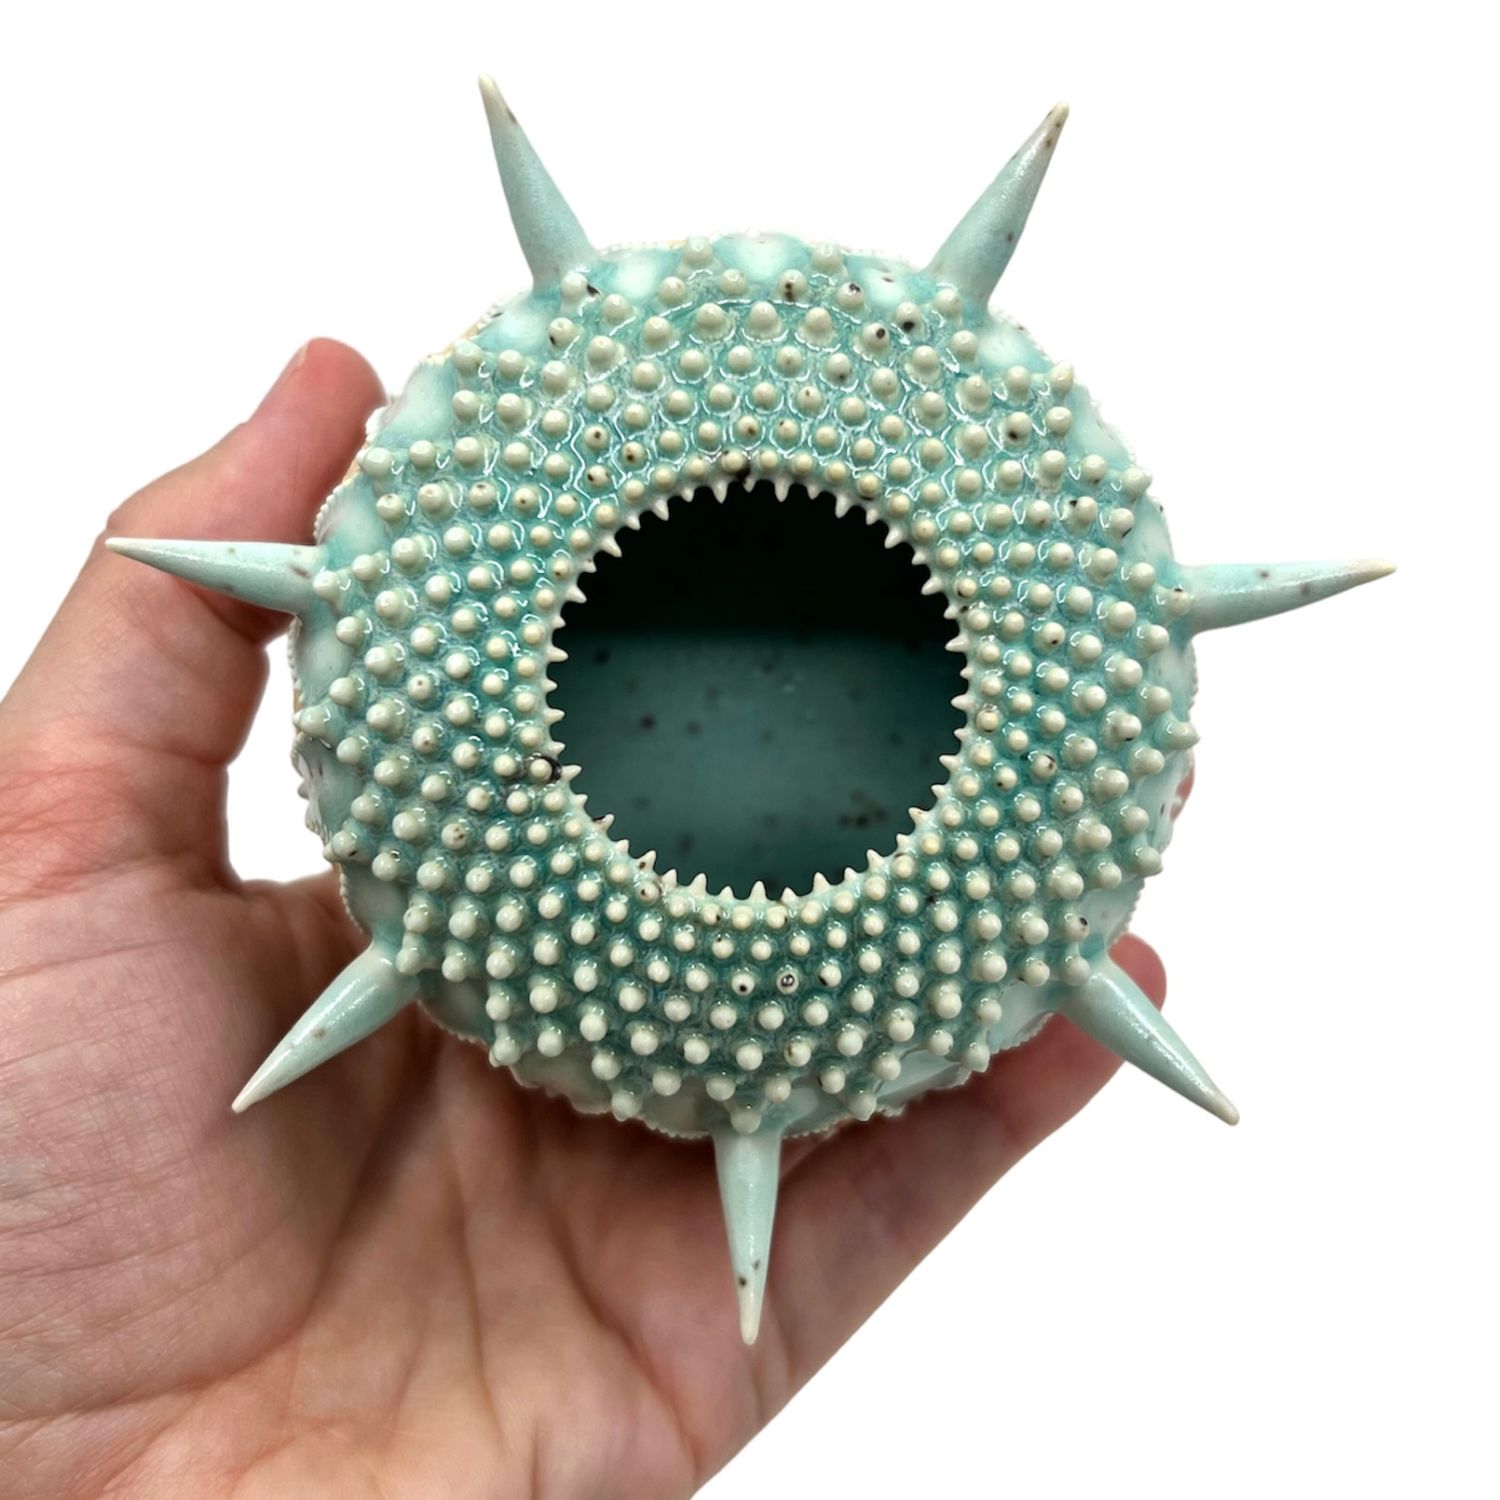 Zara Gardner: Turquoise Sculpture with Spikes Product Image 4 of 6